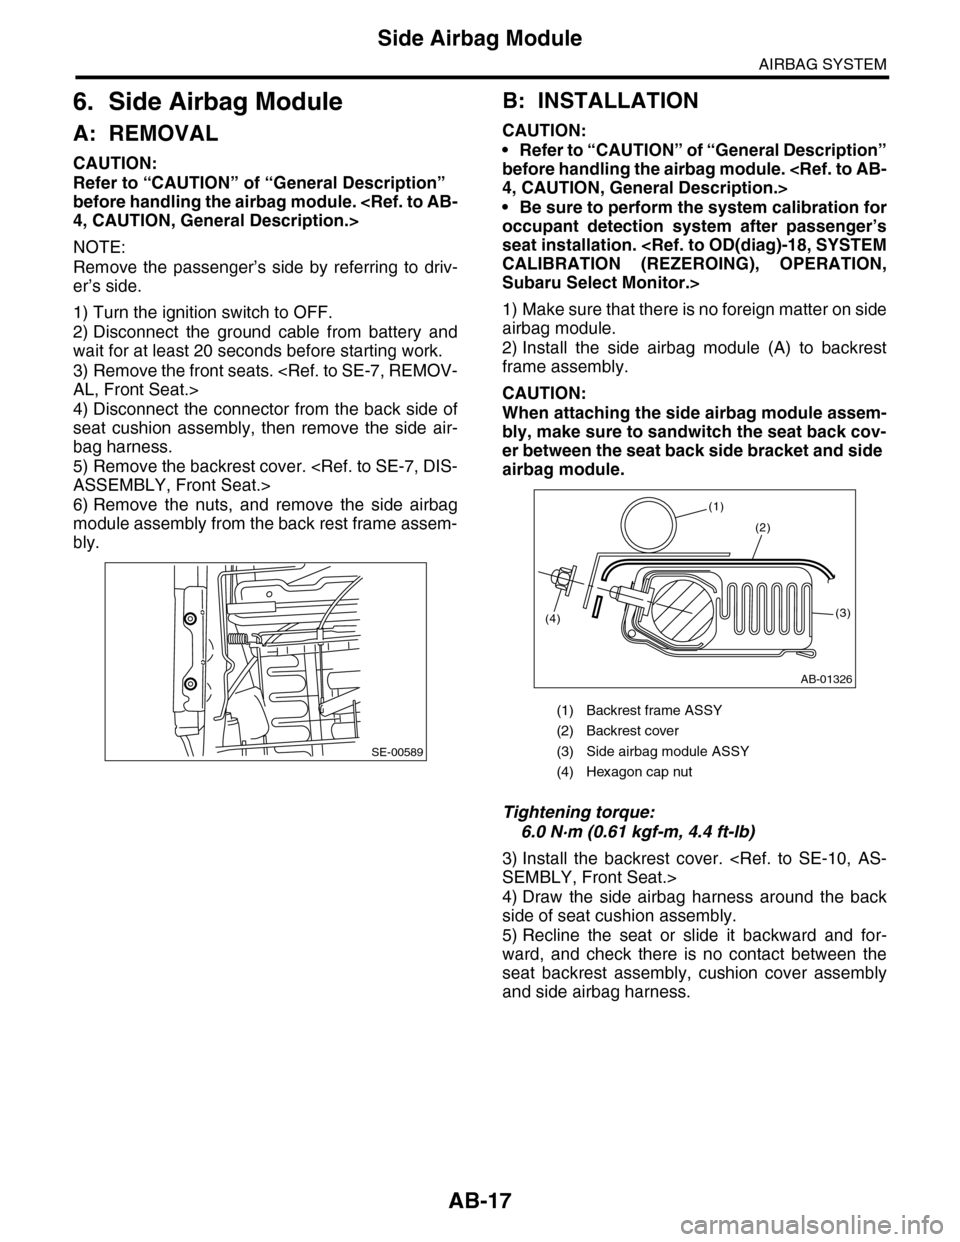 SUBARU TRIBECA 2009 1.G Service Workshop Manual AB-17
Side Airbag Module
AIRBAG SYSTEM
6. Side Airbag Module
A: REMOVAL
CAUTION:
Refer to “CAUTION” of “General Description” 
before handling the airbag module. <Ref. to AB-
4, CAUTION, Genera